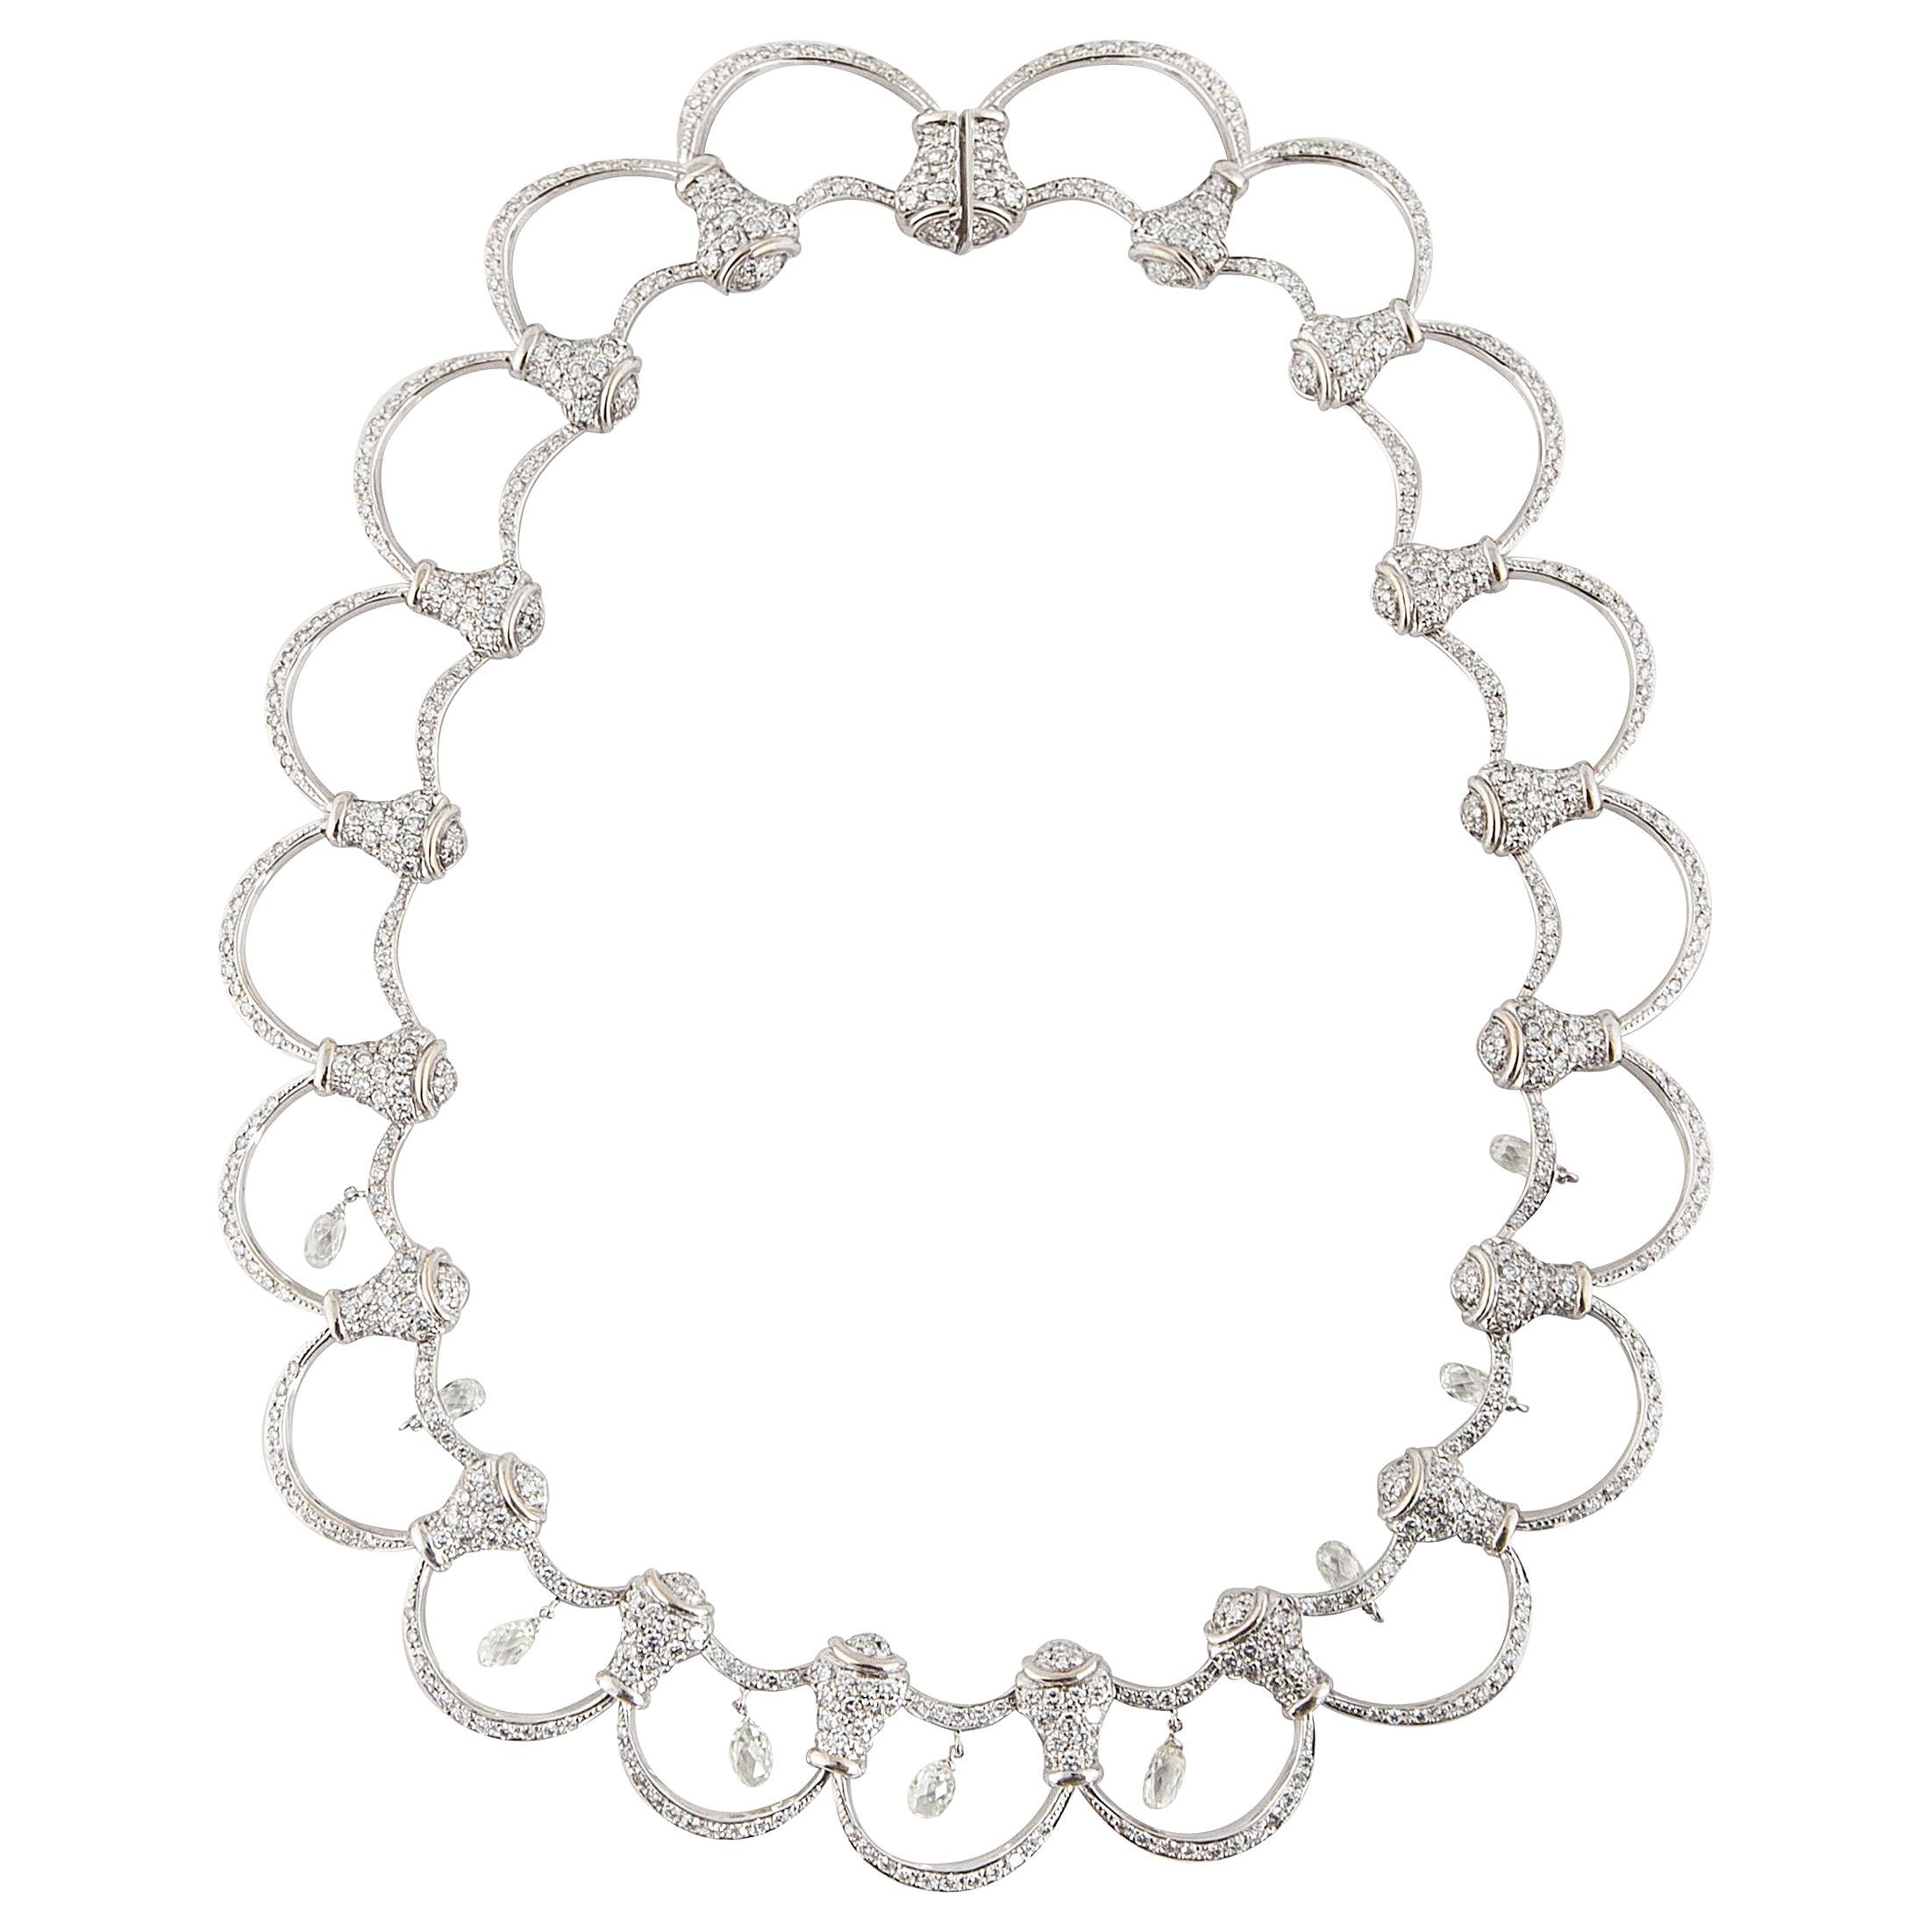 Diamond Collar Necklace with Briolettes in 18K White Gold